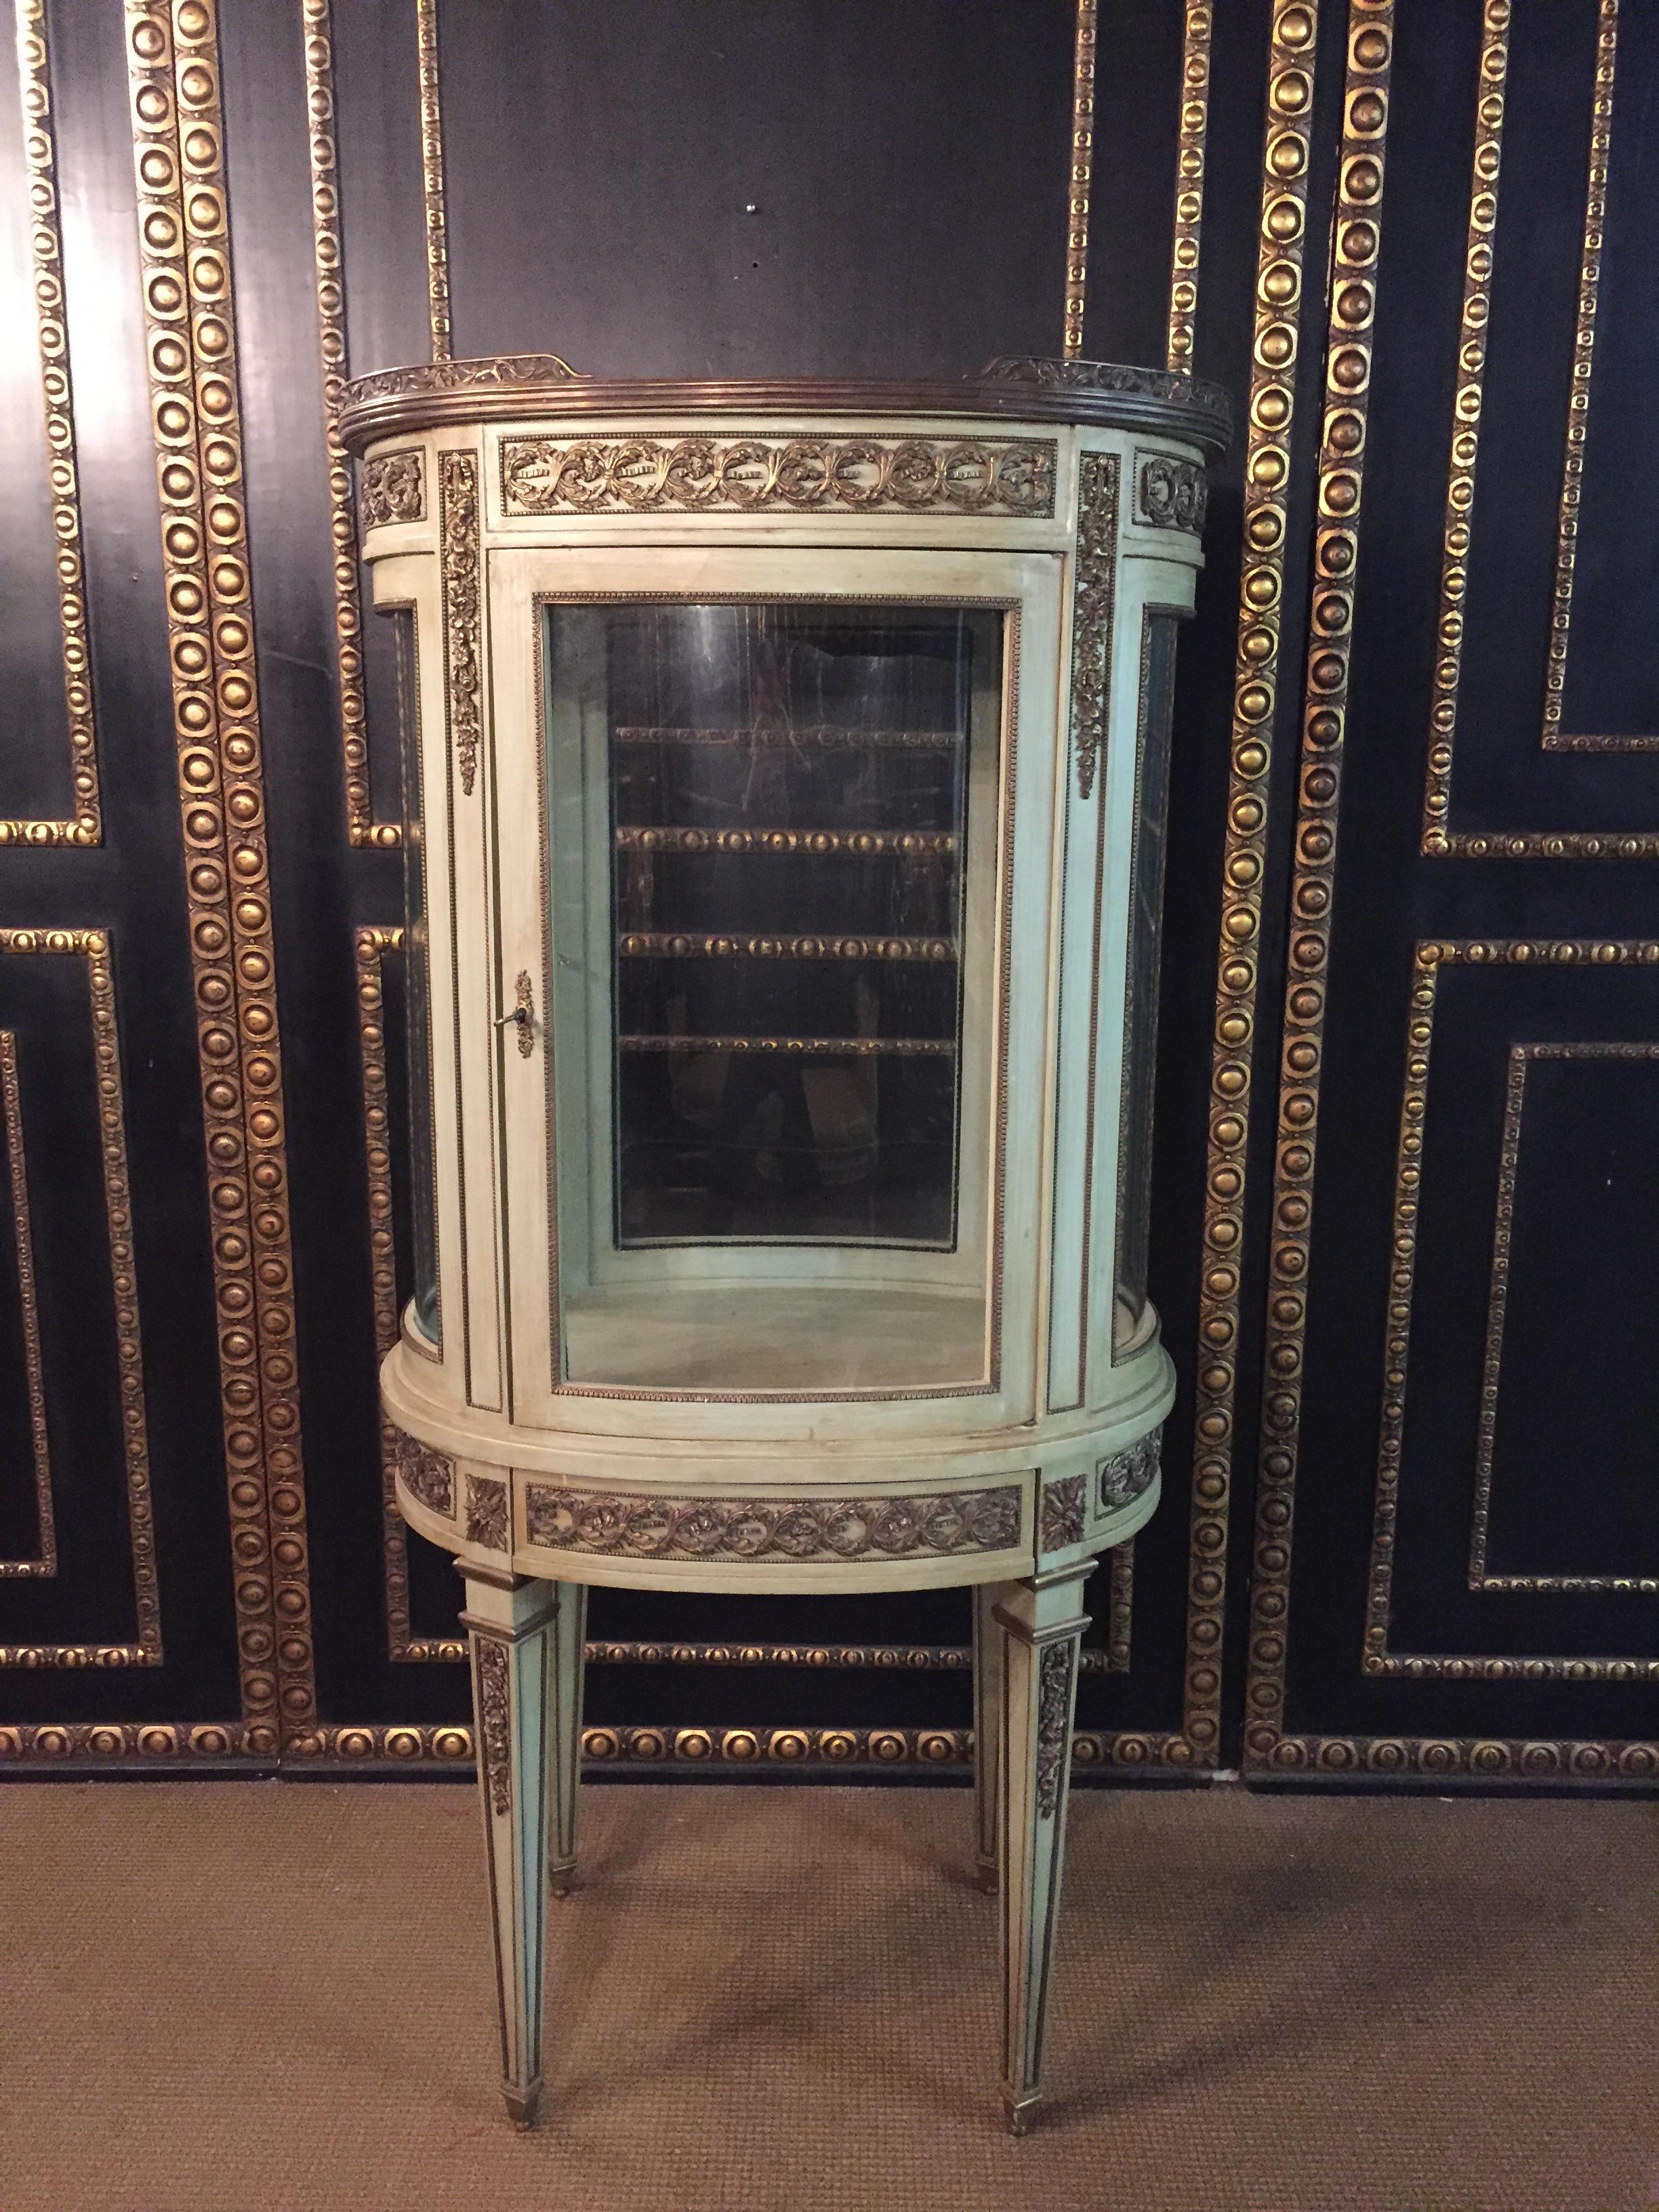 Solid beechwood colored hand painted. Oval one- drawered combered and four-sided glassed body on high, brass-painted four edged legs, ending in sabots. Border and cornicing with finely engraved classicist bronze. Fine broken-through border gallery